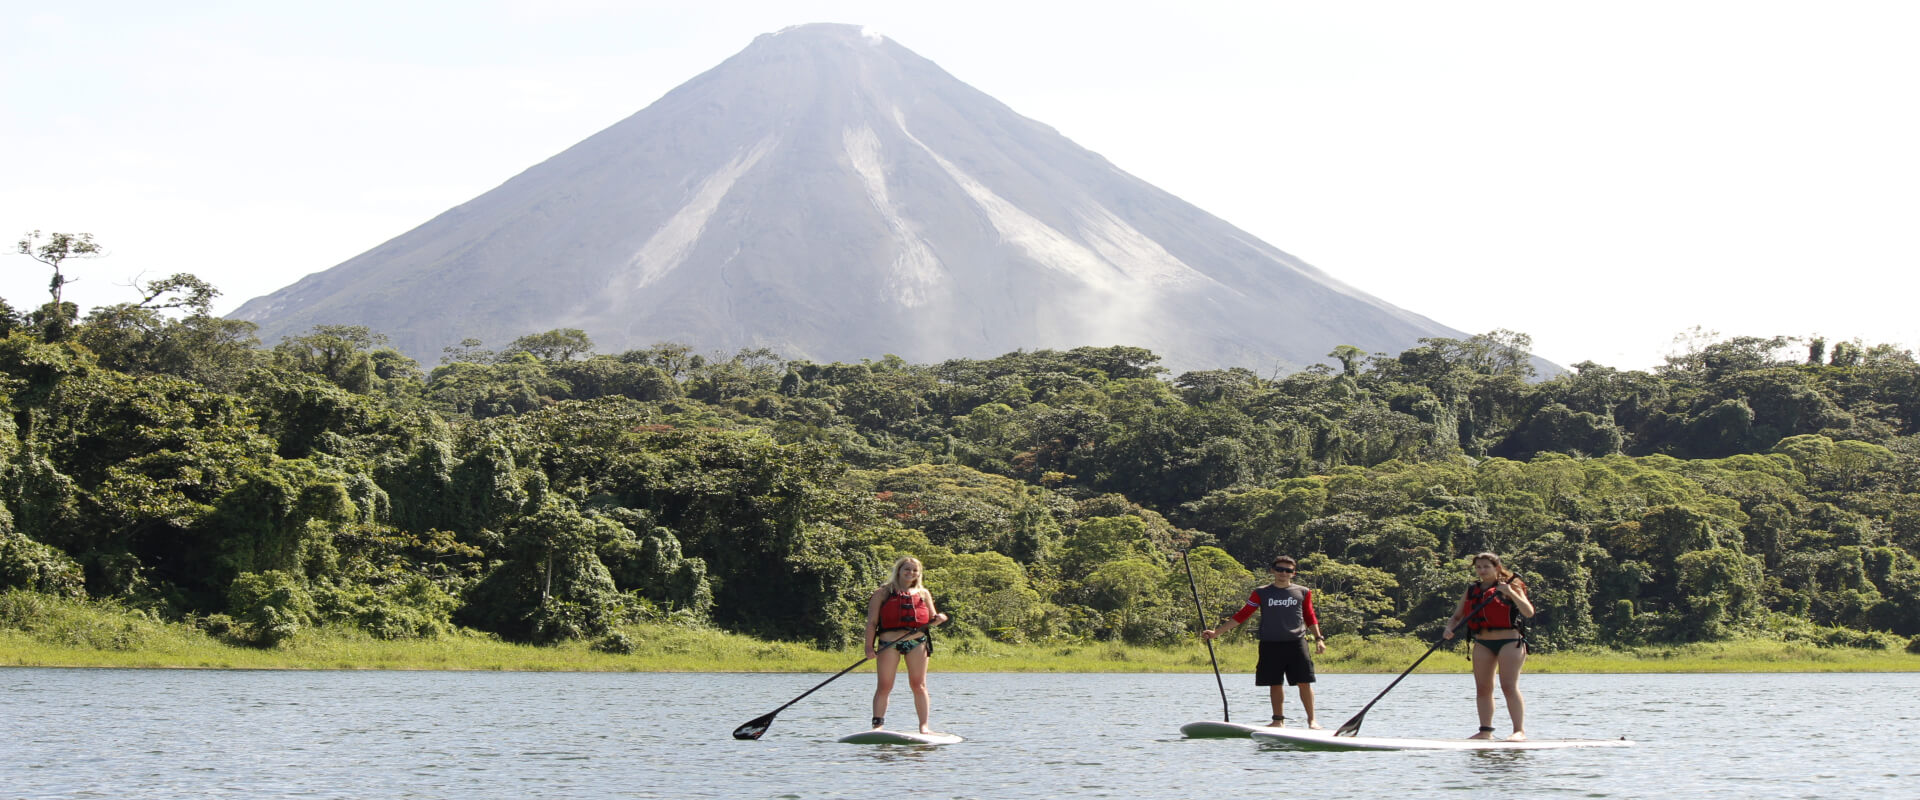 Stand Up Paddle (SUP) en el Lago Arenal | Costa Rica Jade Tours